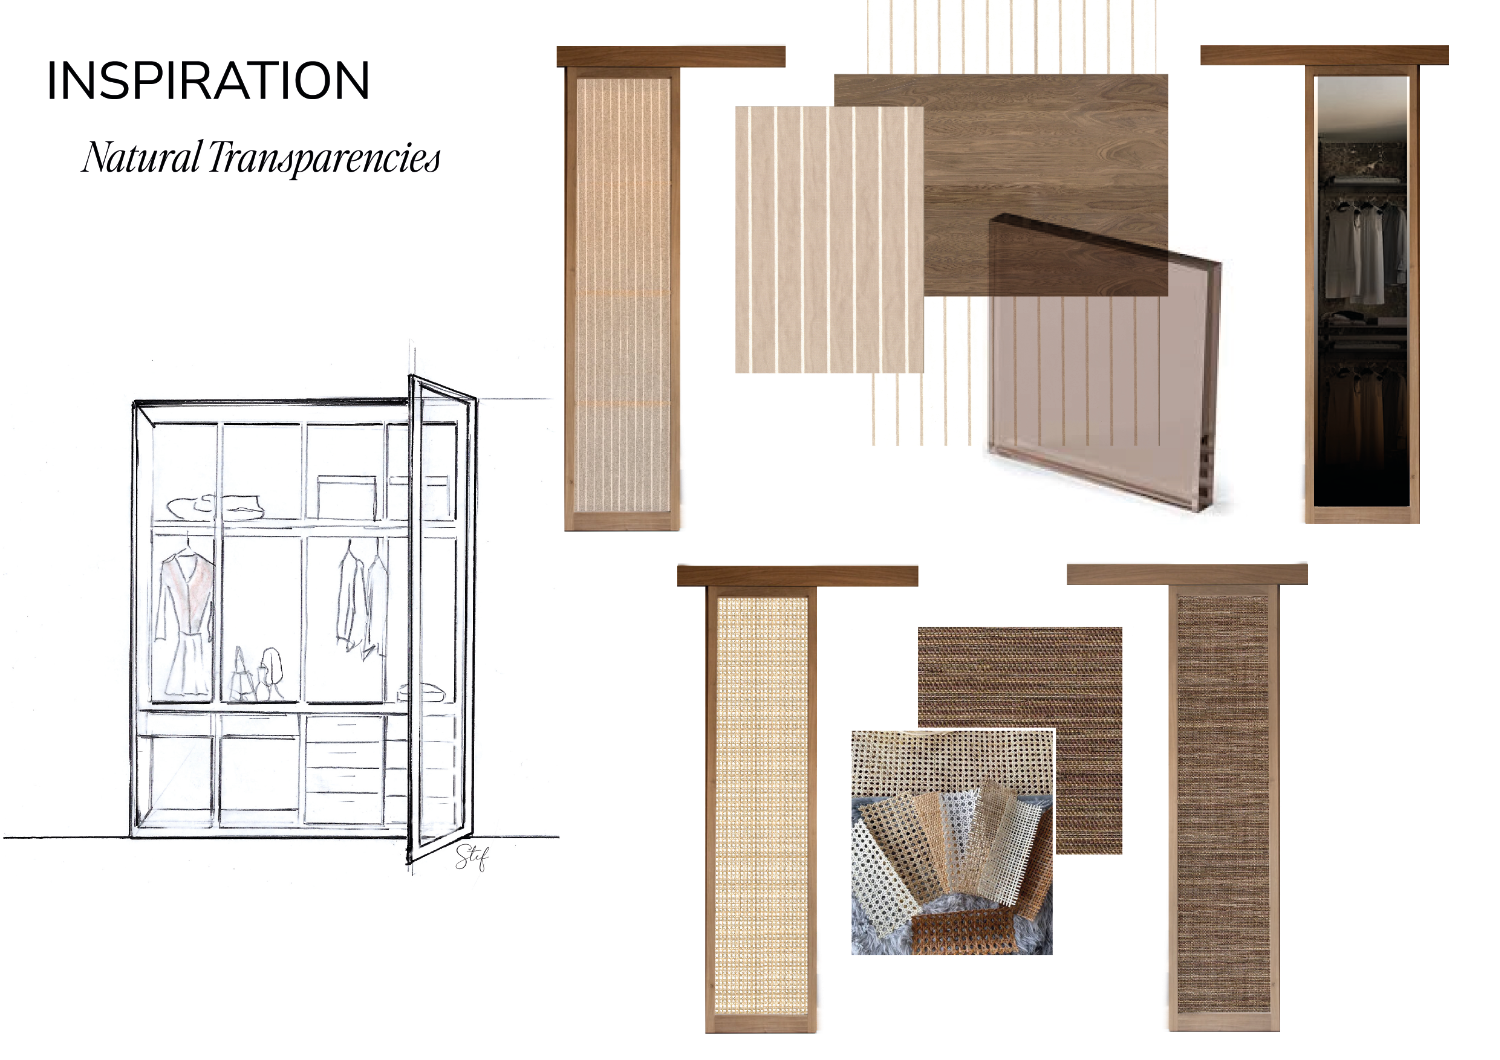 Mood board for the choice of fabrics, materials and textures for the design of the walk-in wardrobe room.